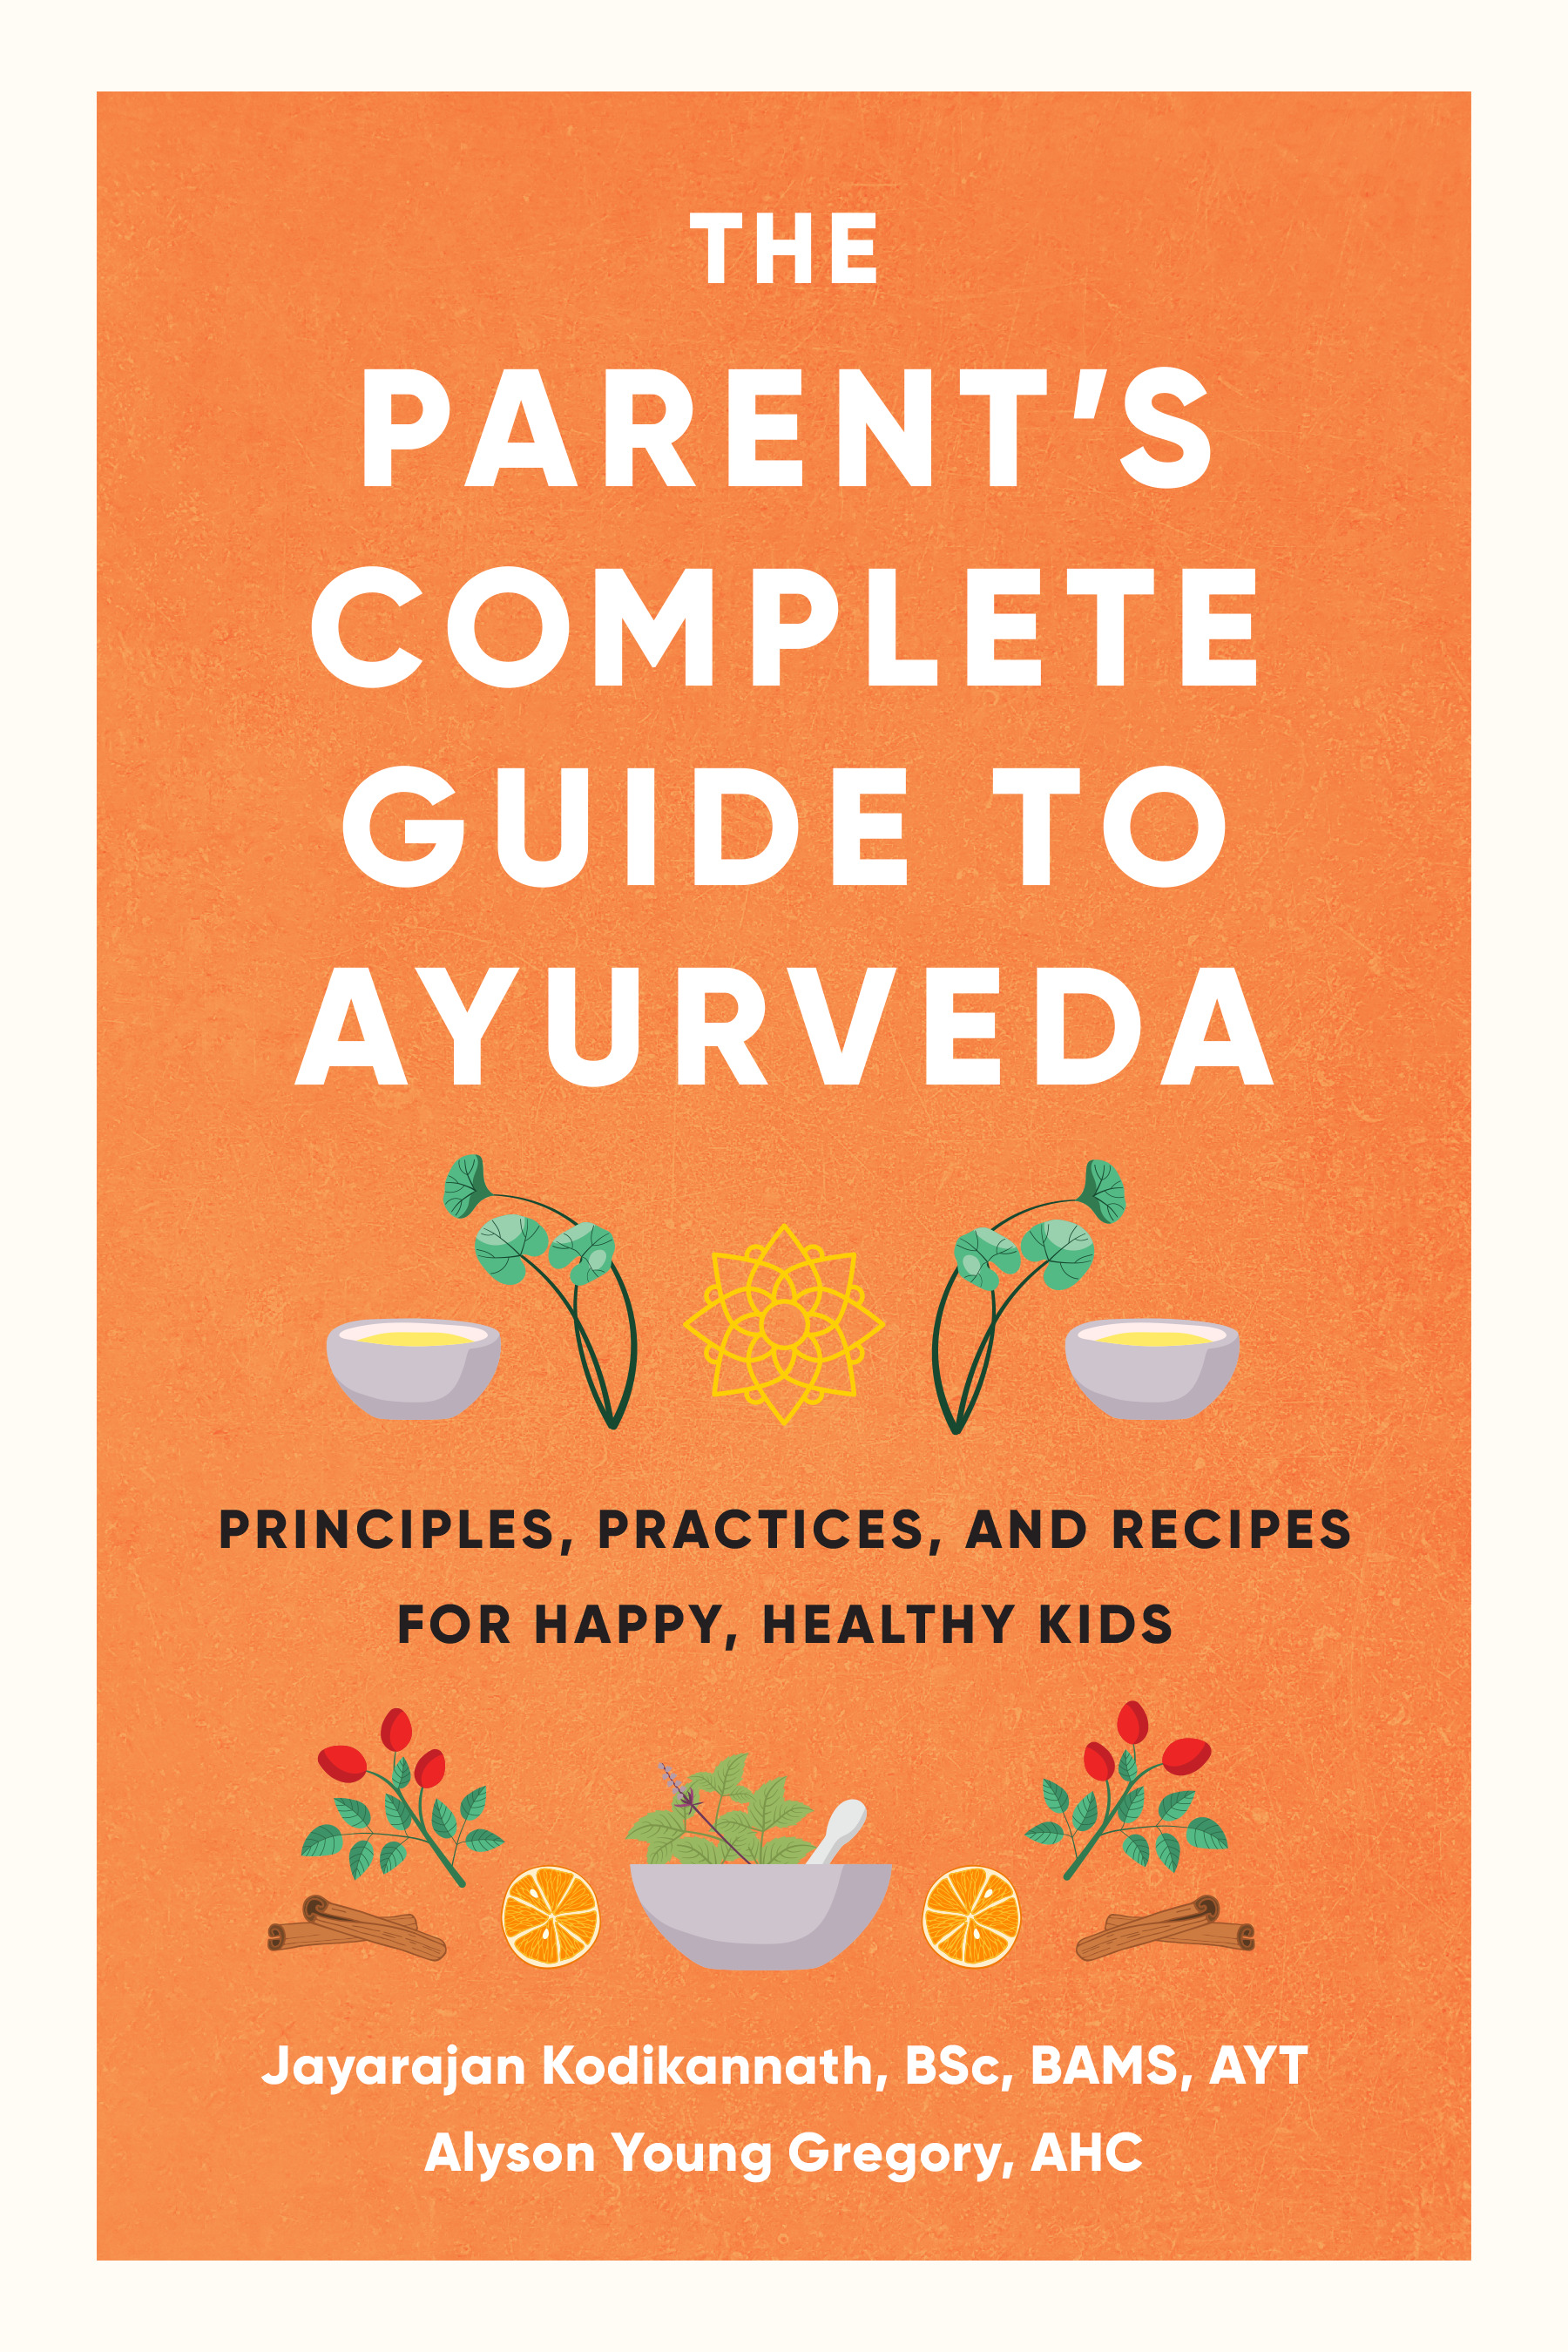 The Parent's Complete Guide to Ayurveda : Principles, Practices, and Recipes for Happy, Healthy Kids | Health